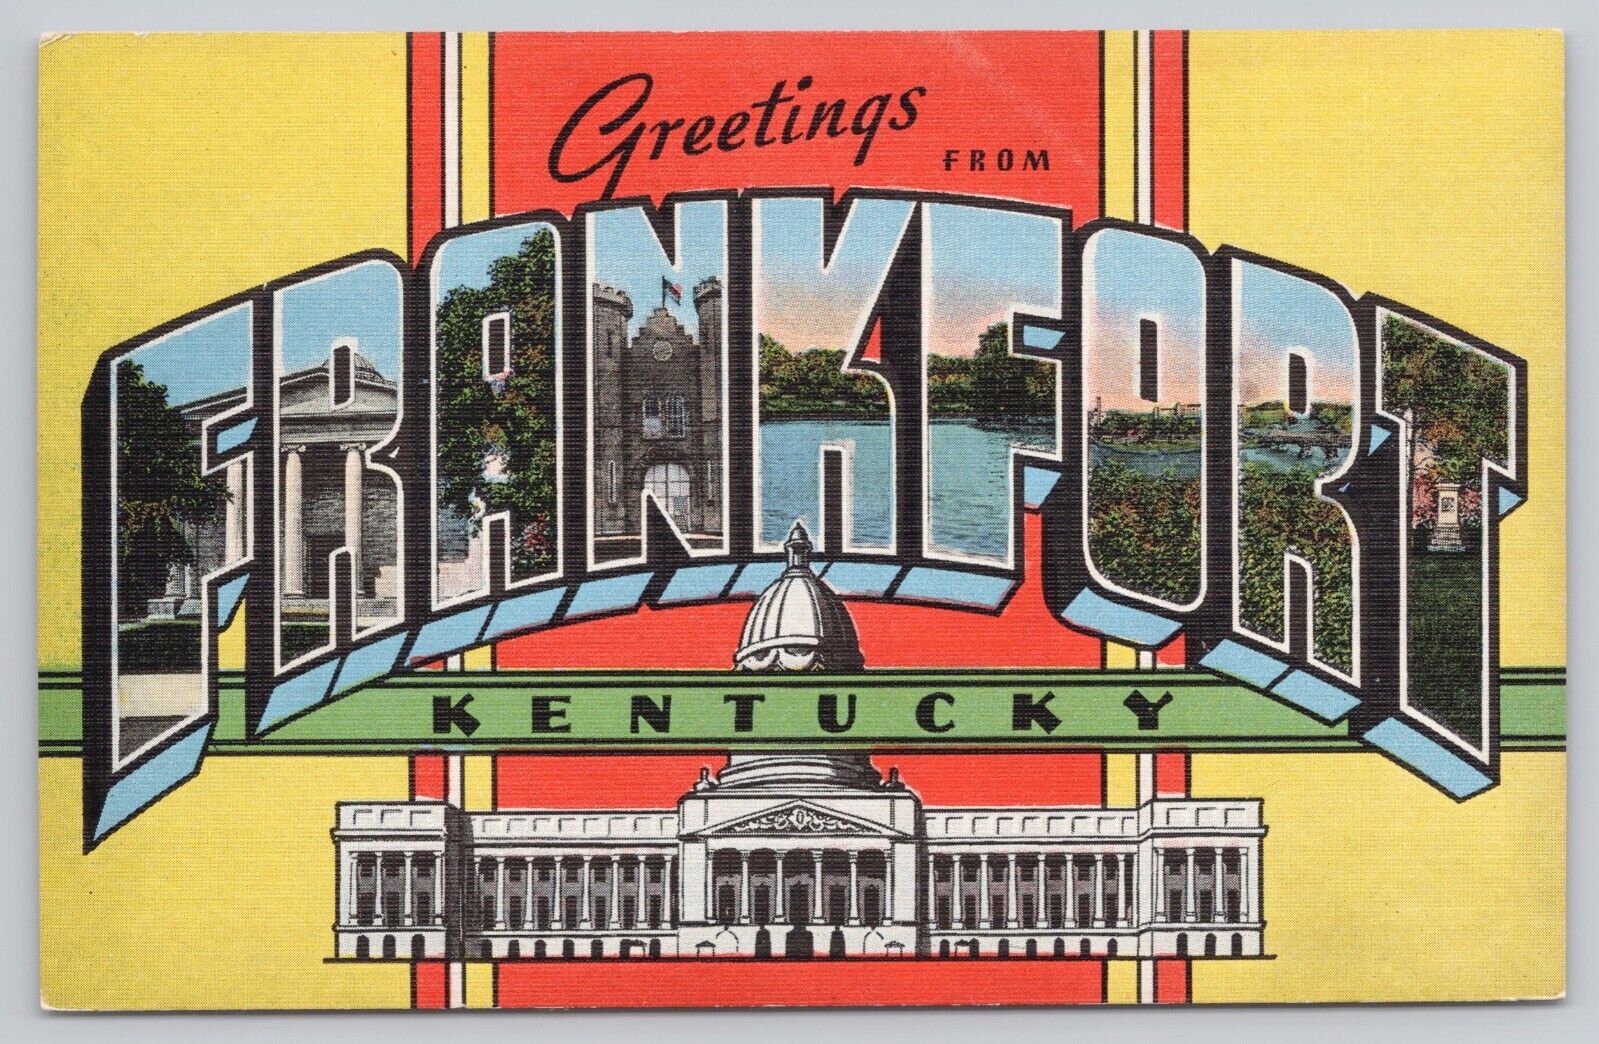 Frankfort Kentucky, Large Letter Greetings, State Capitol, Vintage Postcard